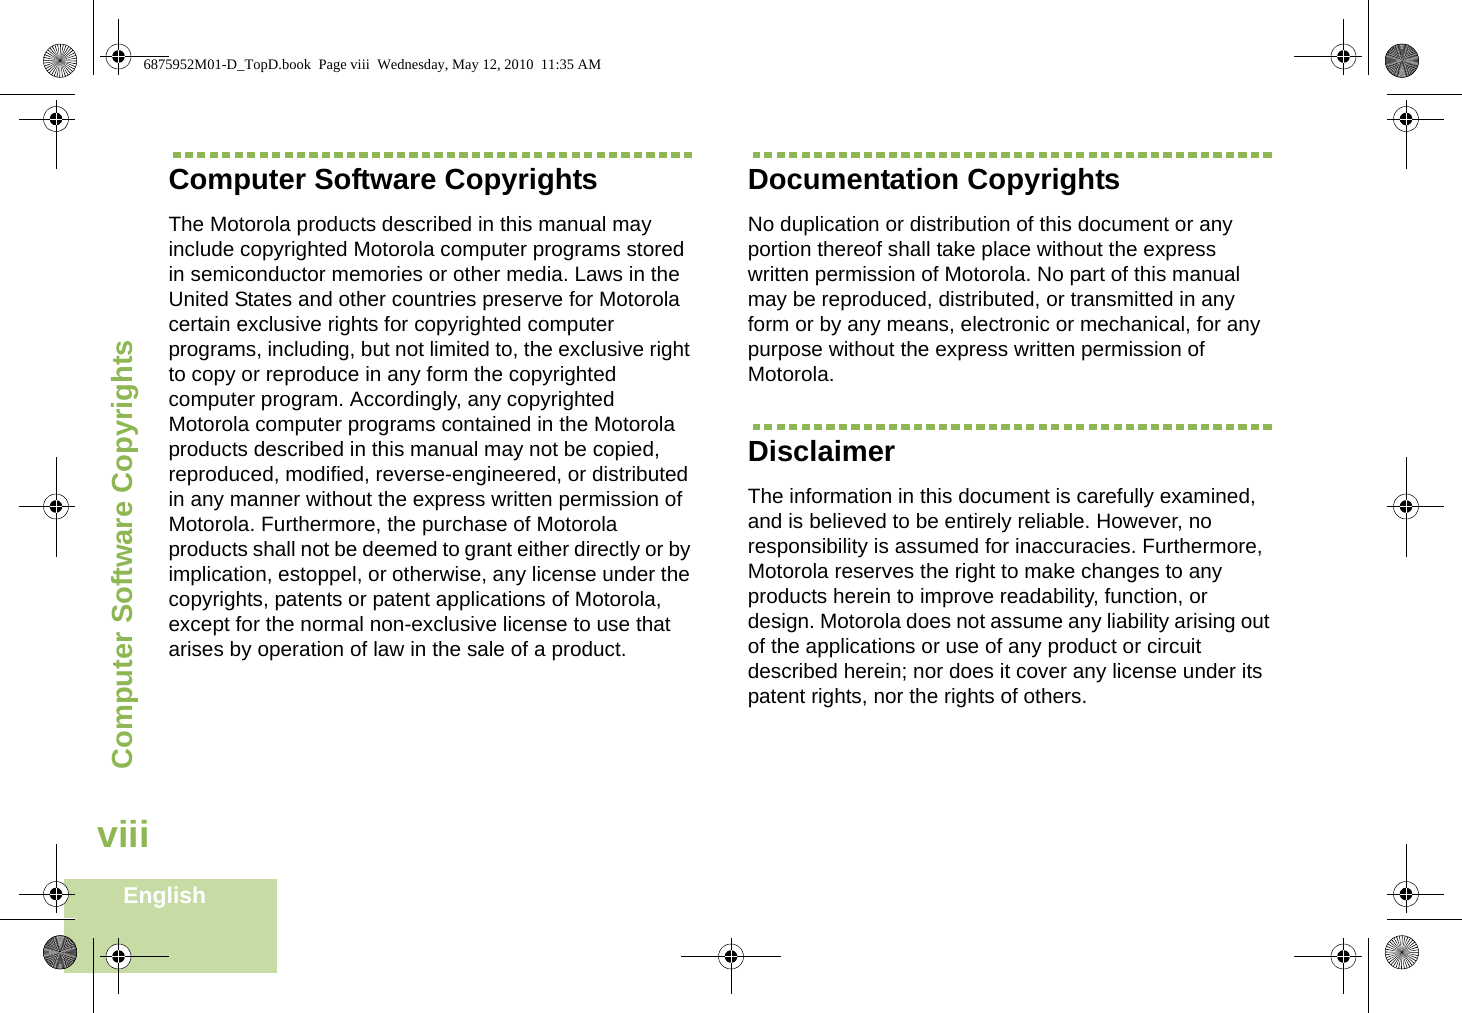 Computer Software CopyrightsEnglishviiiComputer Software CopyrightsThe Motorola products described in this manual may include copyrighted Motorola computer programs stored in semiconductor memories or other media. Laws in the United States and other countries preserve for Motorola certain exclusive rights for copyrighted computer programs, including, but not limited to, the exclusive right to copy or reproduce in any form the copyrighted computer program. Accordingly, any copyrighted Motorola computer programs contained in the Motorola products described in this manual may not be copied, reproduced, modified, reverse-engineered, or distributed in any manner without the express written permission of Motorola. Furthermore, the purchase of Motorola products shall not be deemed to grant either directly or by implication, estoppel, or otherwise, any license under the copyrights, patents or patent applications of Motorola, except for the normal non-exclusive license to use that arises by operation of law in the sale of a product.Documentation CopyrightsNo duplication or distribution of this document or any portion thereof shall take place without the express written permission of Motorola. No part of this manual may be reproduced, distributed, or transmitted in any form or by any means, electronic or mechanical, for any purpose without the express written permission of Motorola.DisclaimerThe information in this document is carefully examined, and is believed to be entirely reliable. However, no responsibility is assumed for inaccuracies. Furthermore, Motorola reserves the right to make changes to any products herein to improve readability, function, or design. Motorola does not assume any liability arising out of the applications or use of any product or circuit described herein; nor does it cover any license under its patent rights, nor the rights of others. 6875952M01-D_TopD.book  Page viii  Wednesday, May 12, 2010  11:35 AM